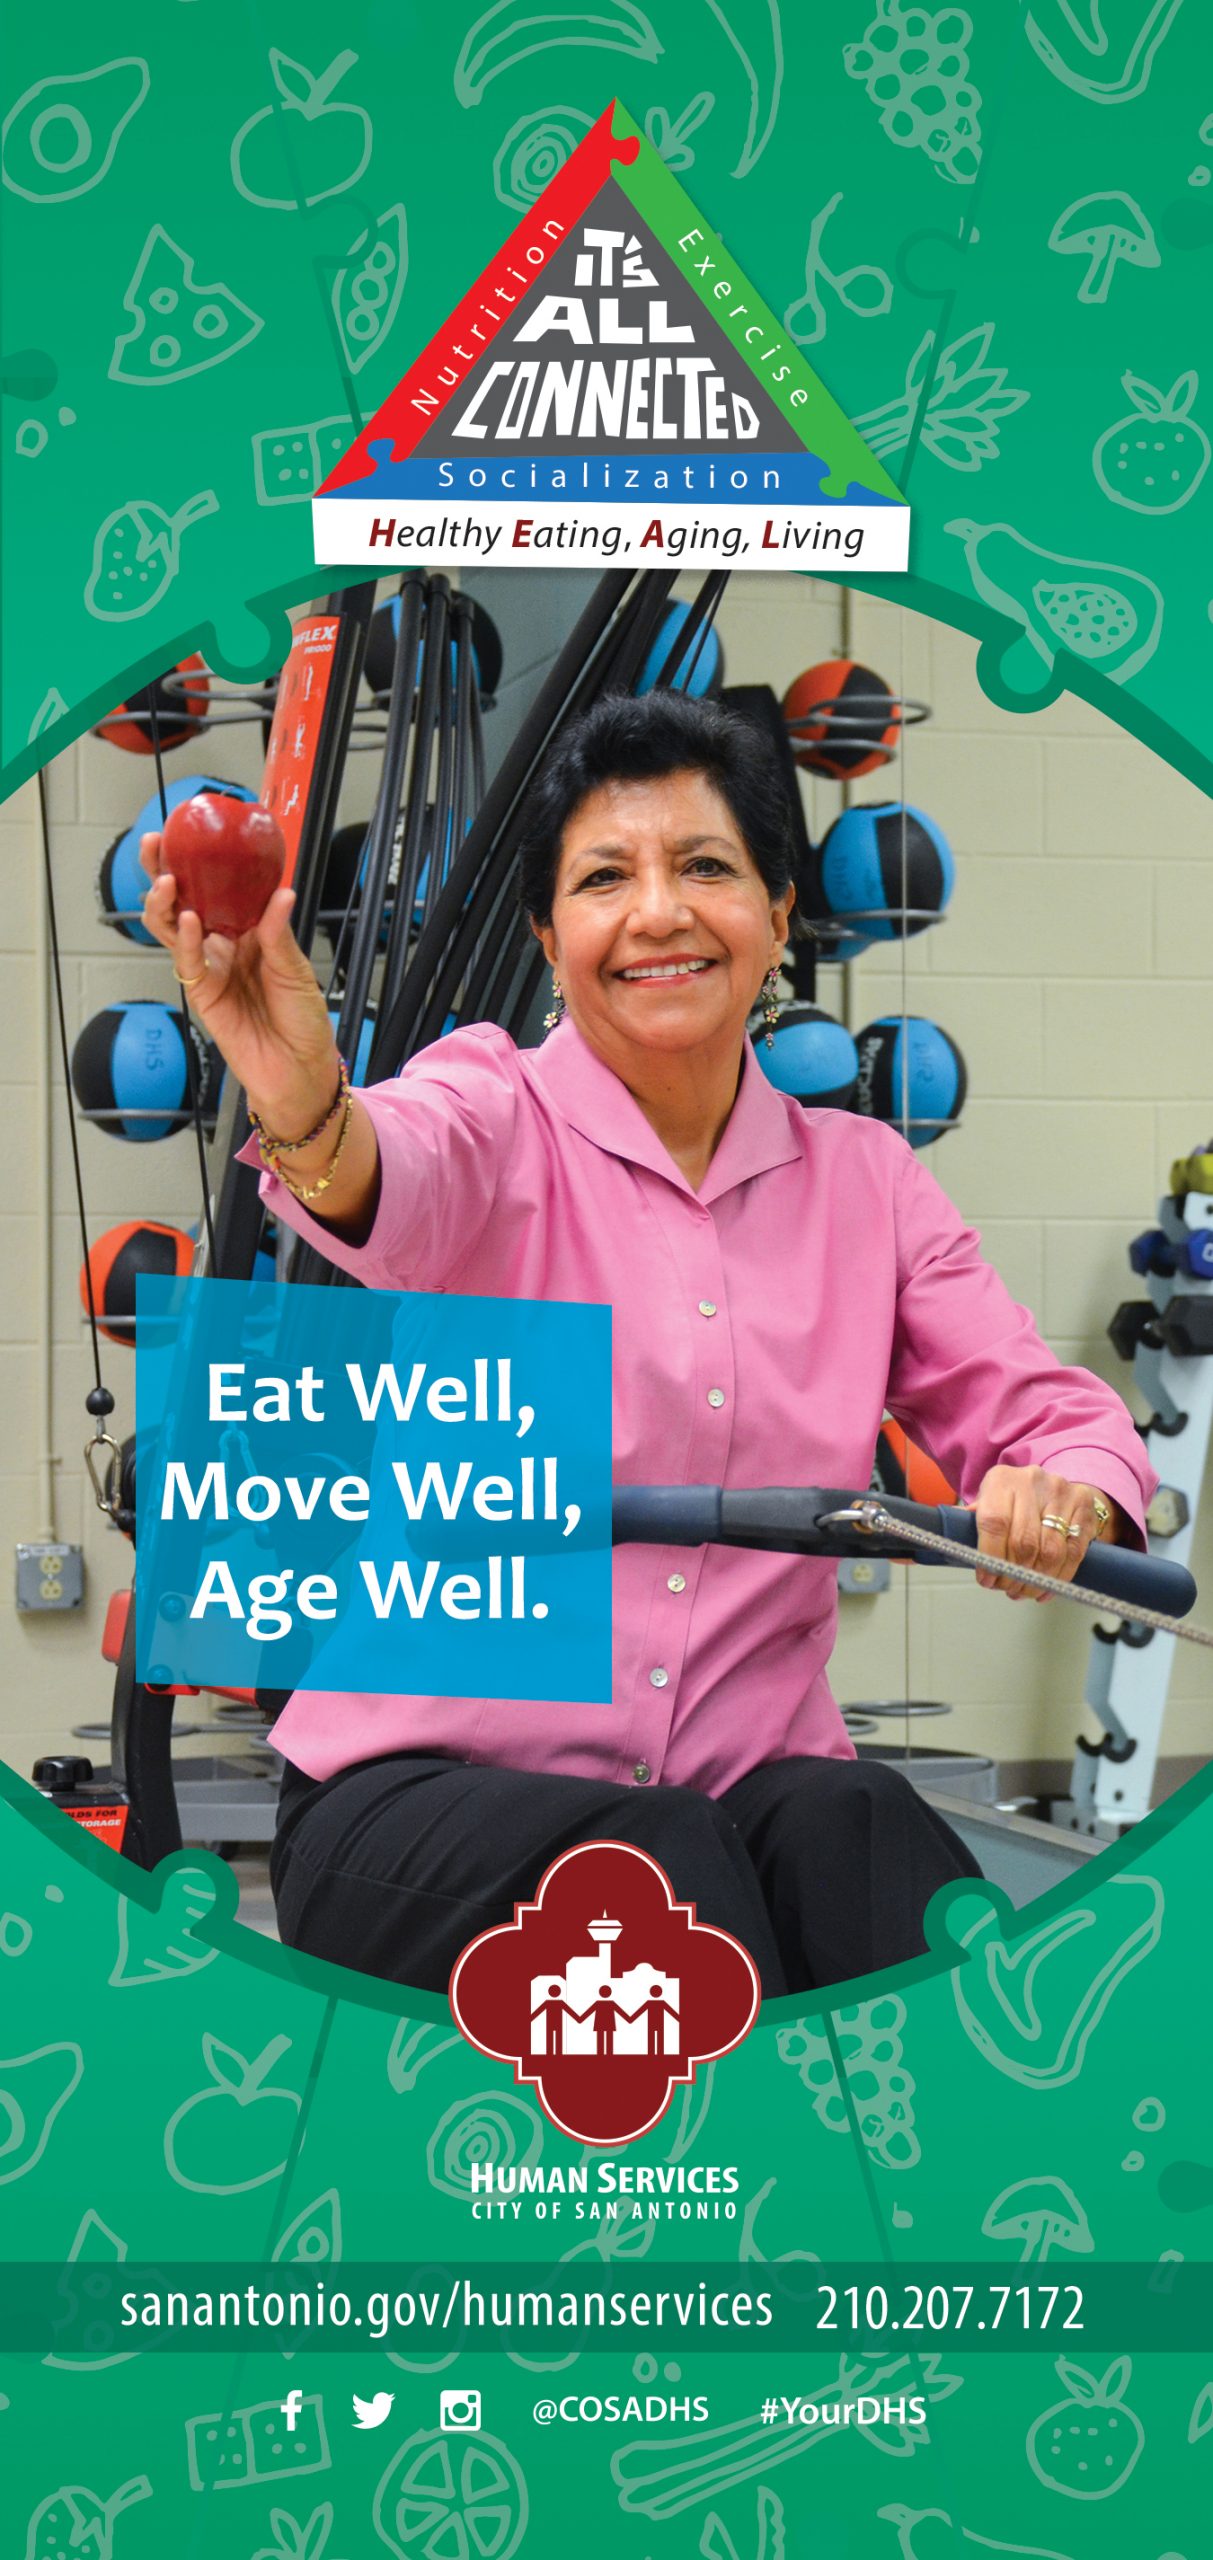 Image reads "It's all Connected Health Eating, Aging, Living. Eat well, move well, age well. sanantonio.gov/humanservices. (210) 207-7172